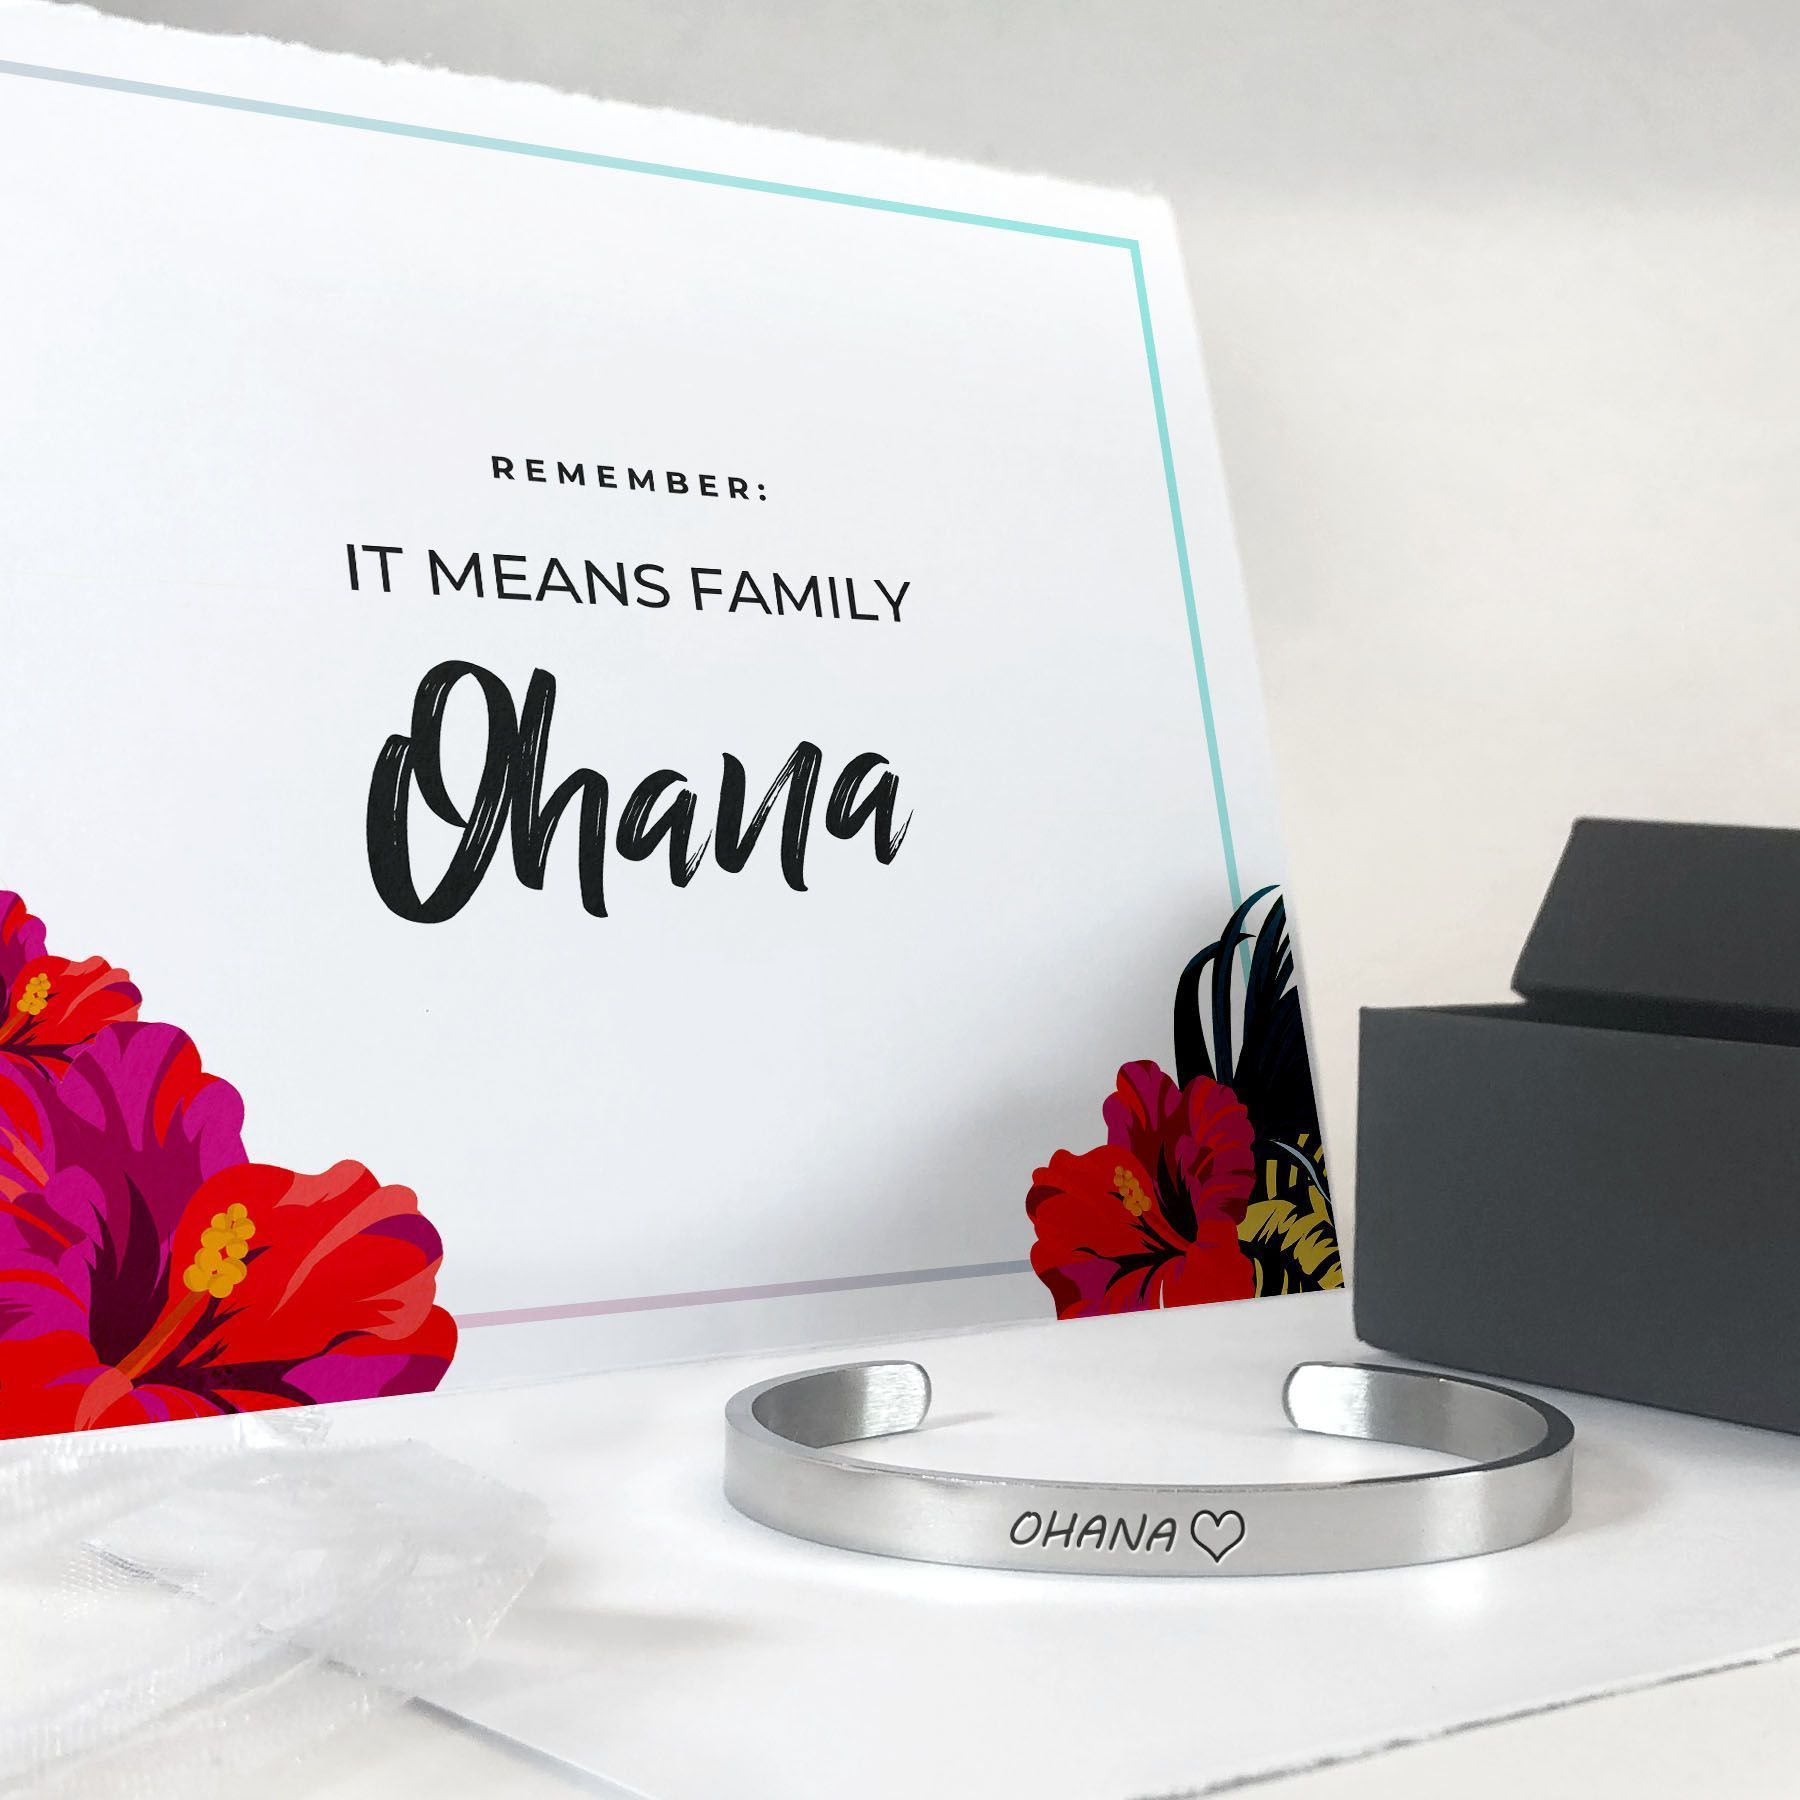 Ohana bracelet in silver with a gift box, bag, and card in the background